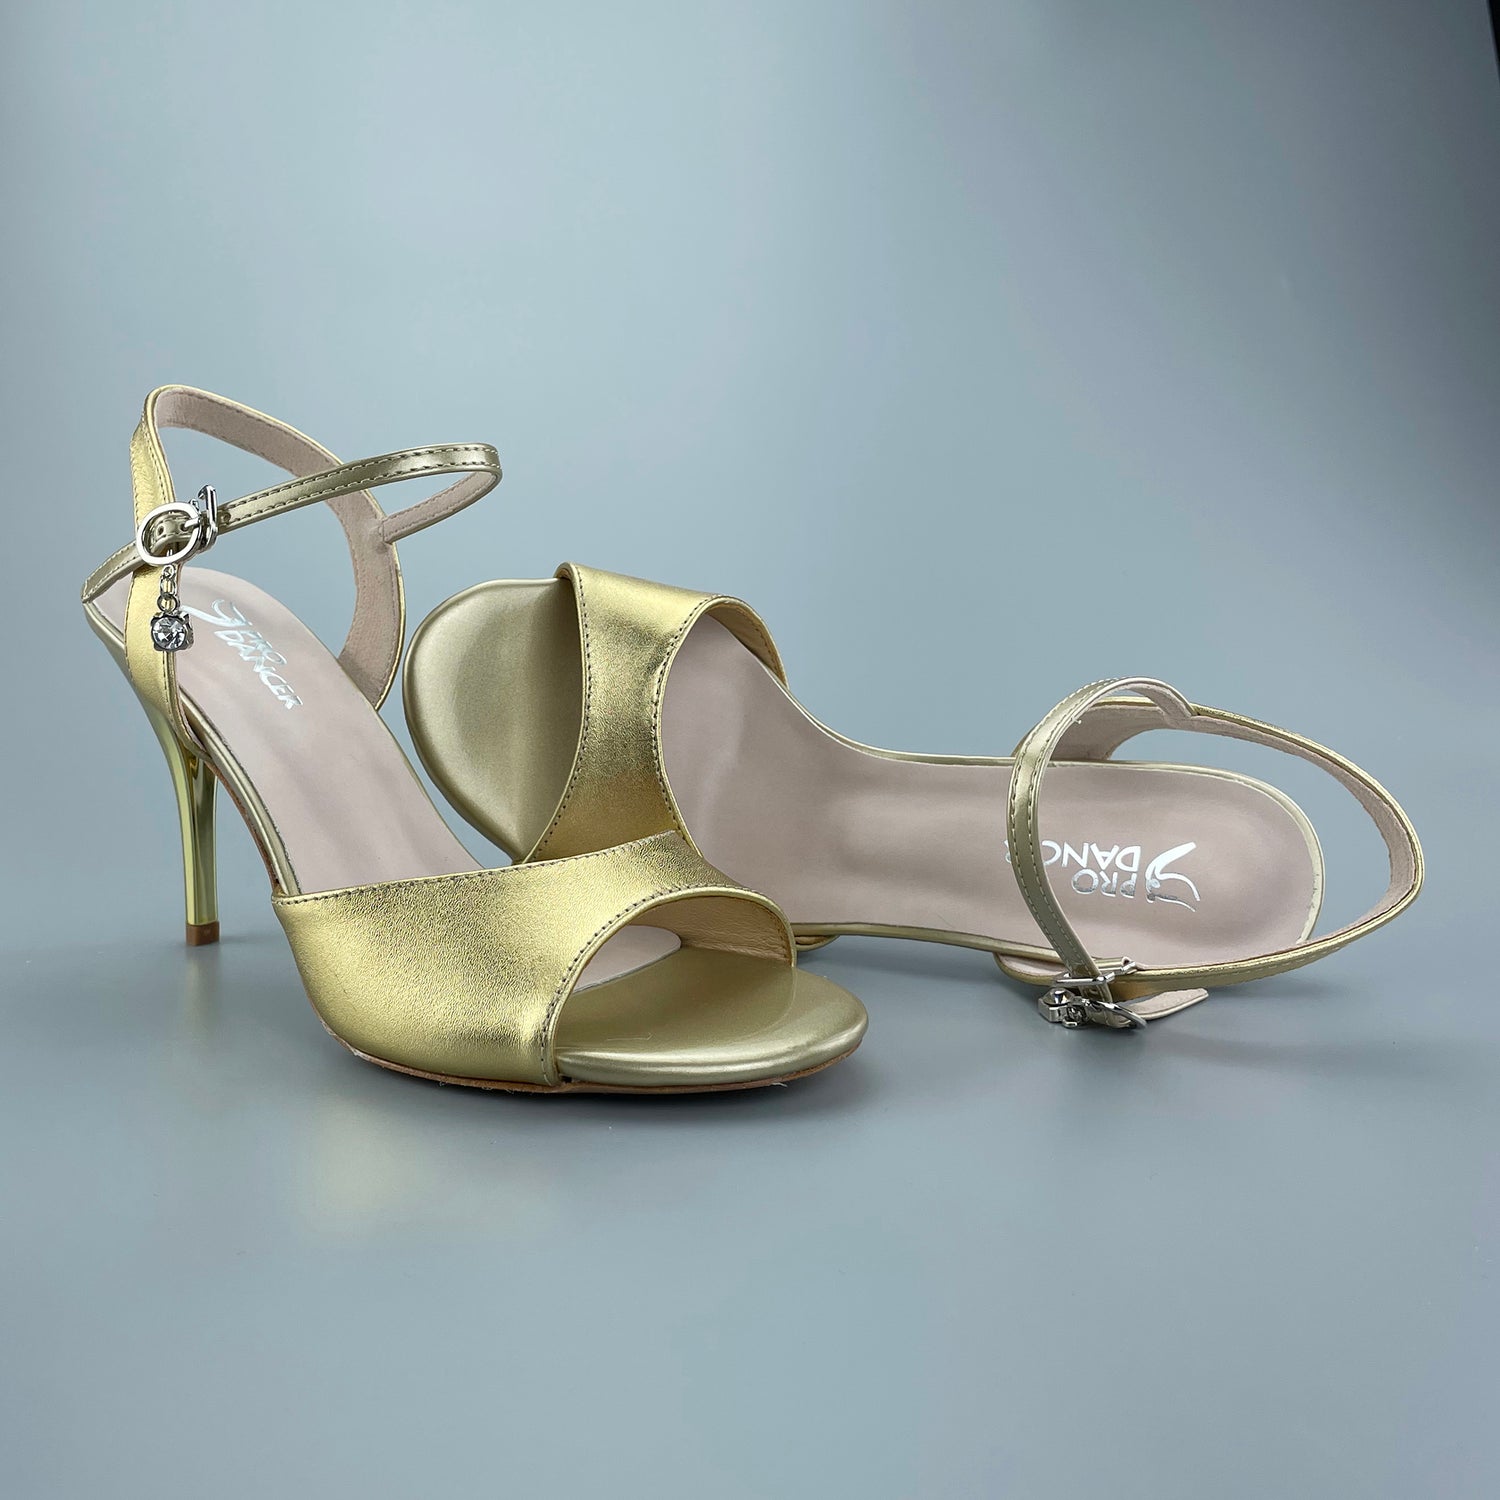 Gold Pro Dancer Tango Shoes open-toe high heels with hard leather sole2